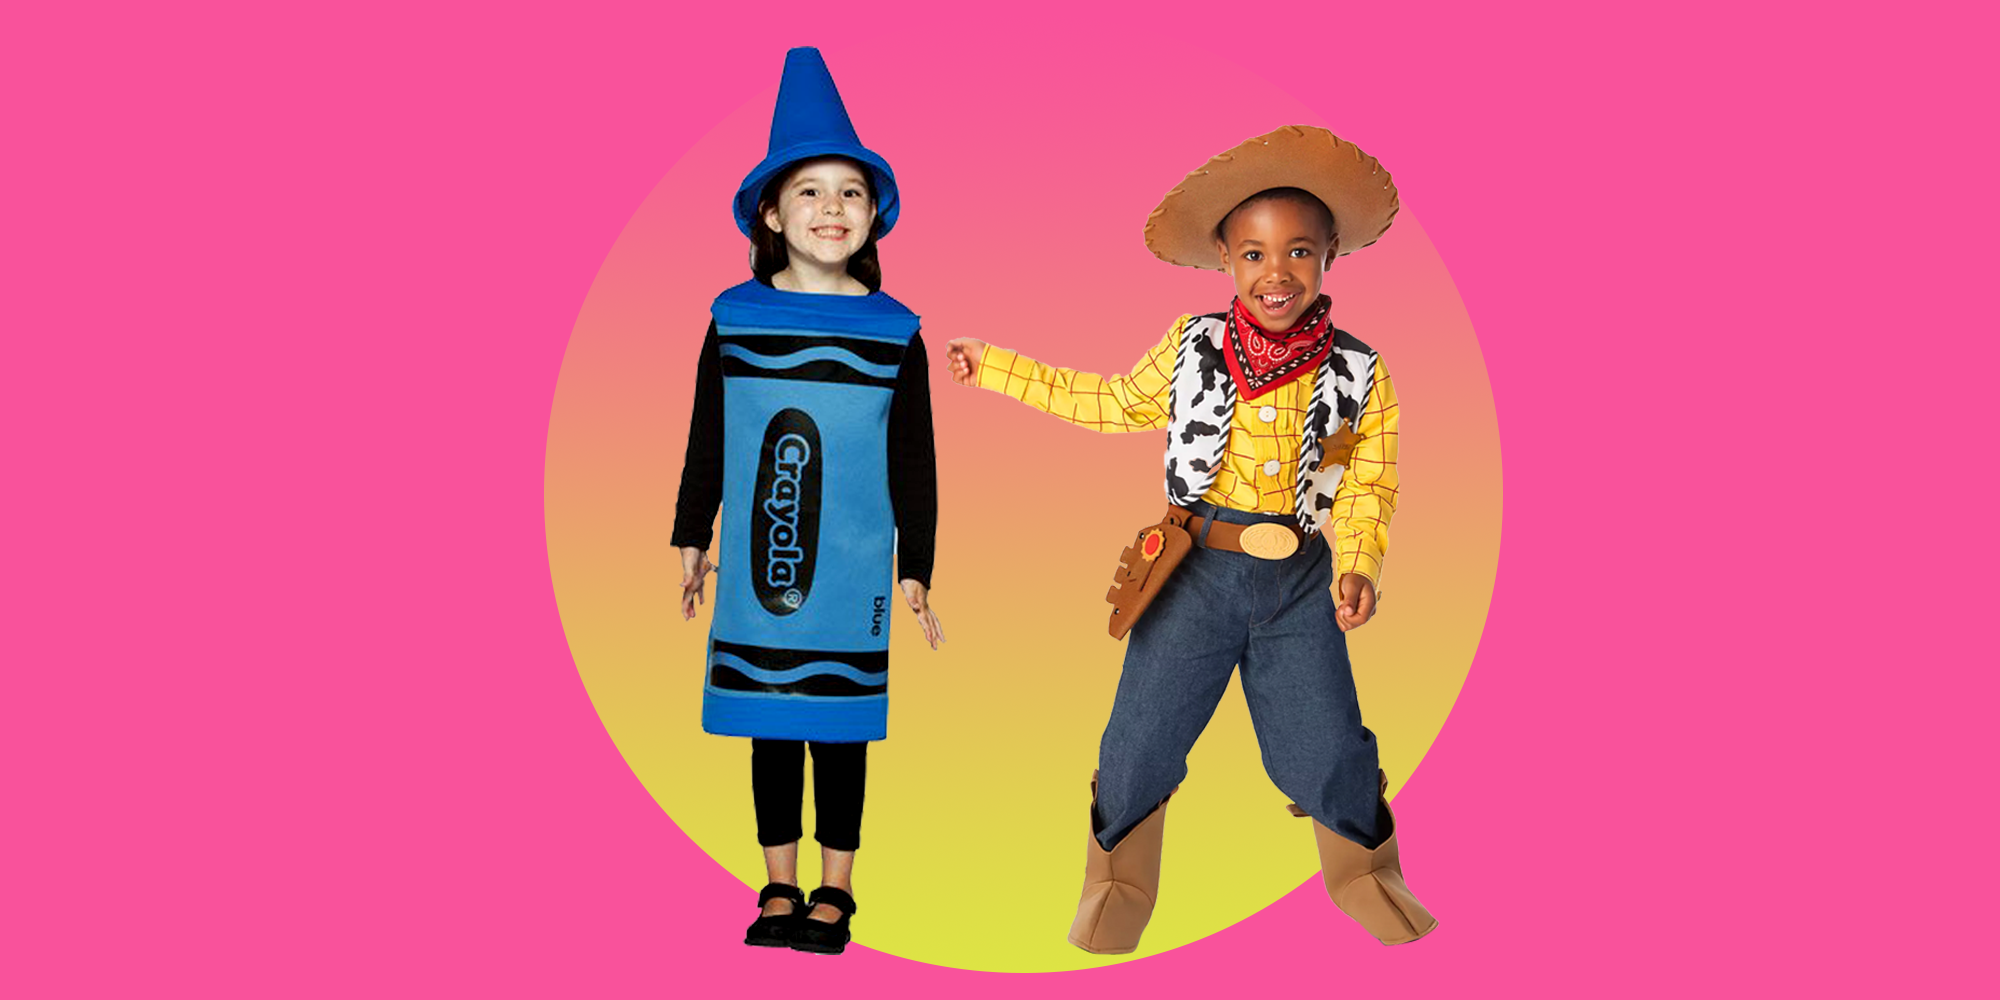 dress up kits for 3 year olds